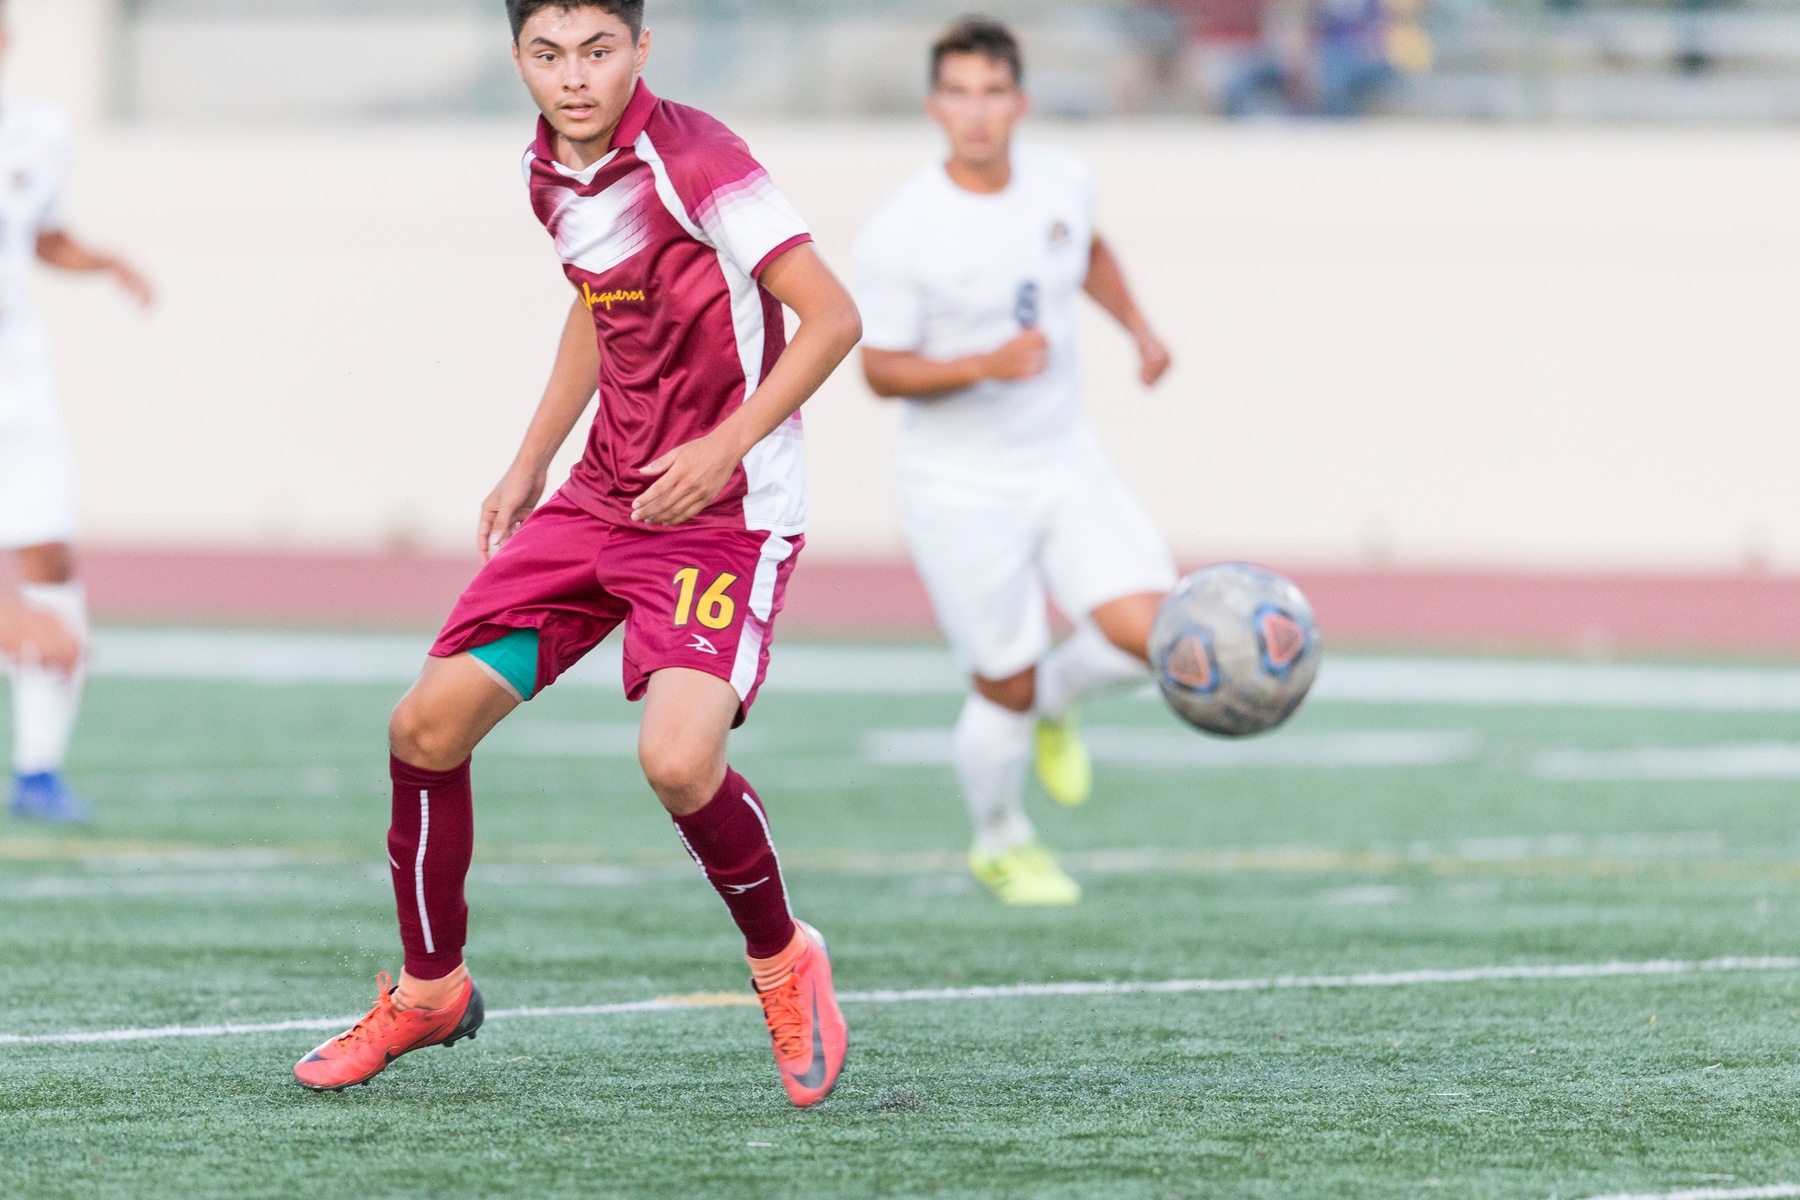 Men's Soccer wins 4th straight game by shutout; team record improves to 6-4